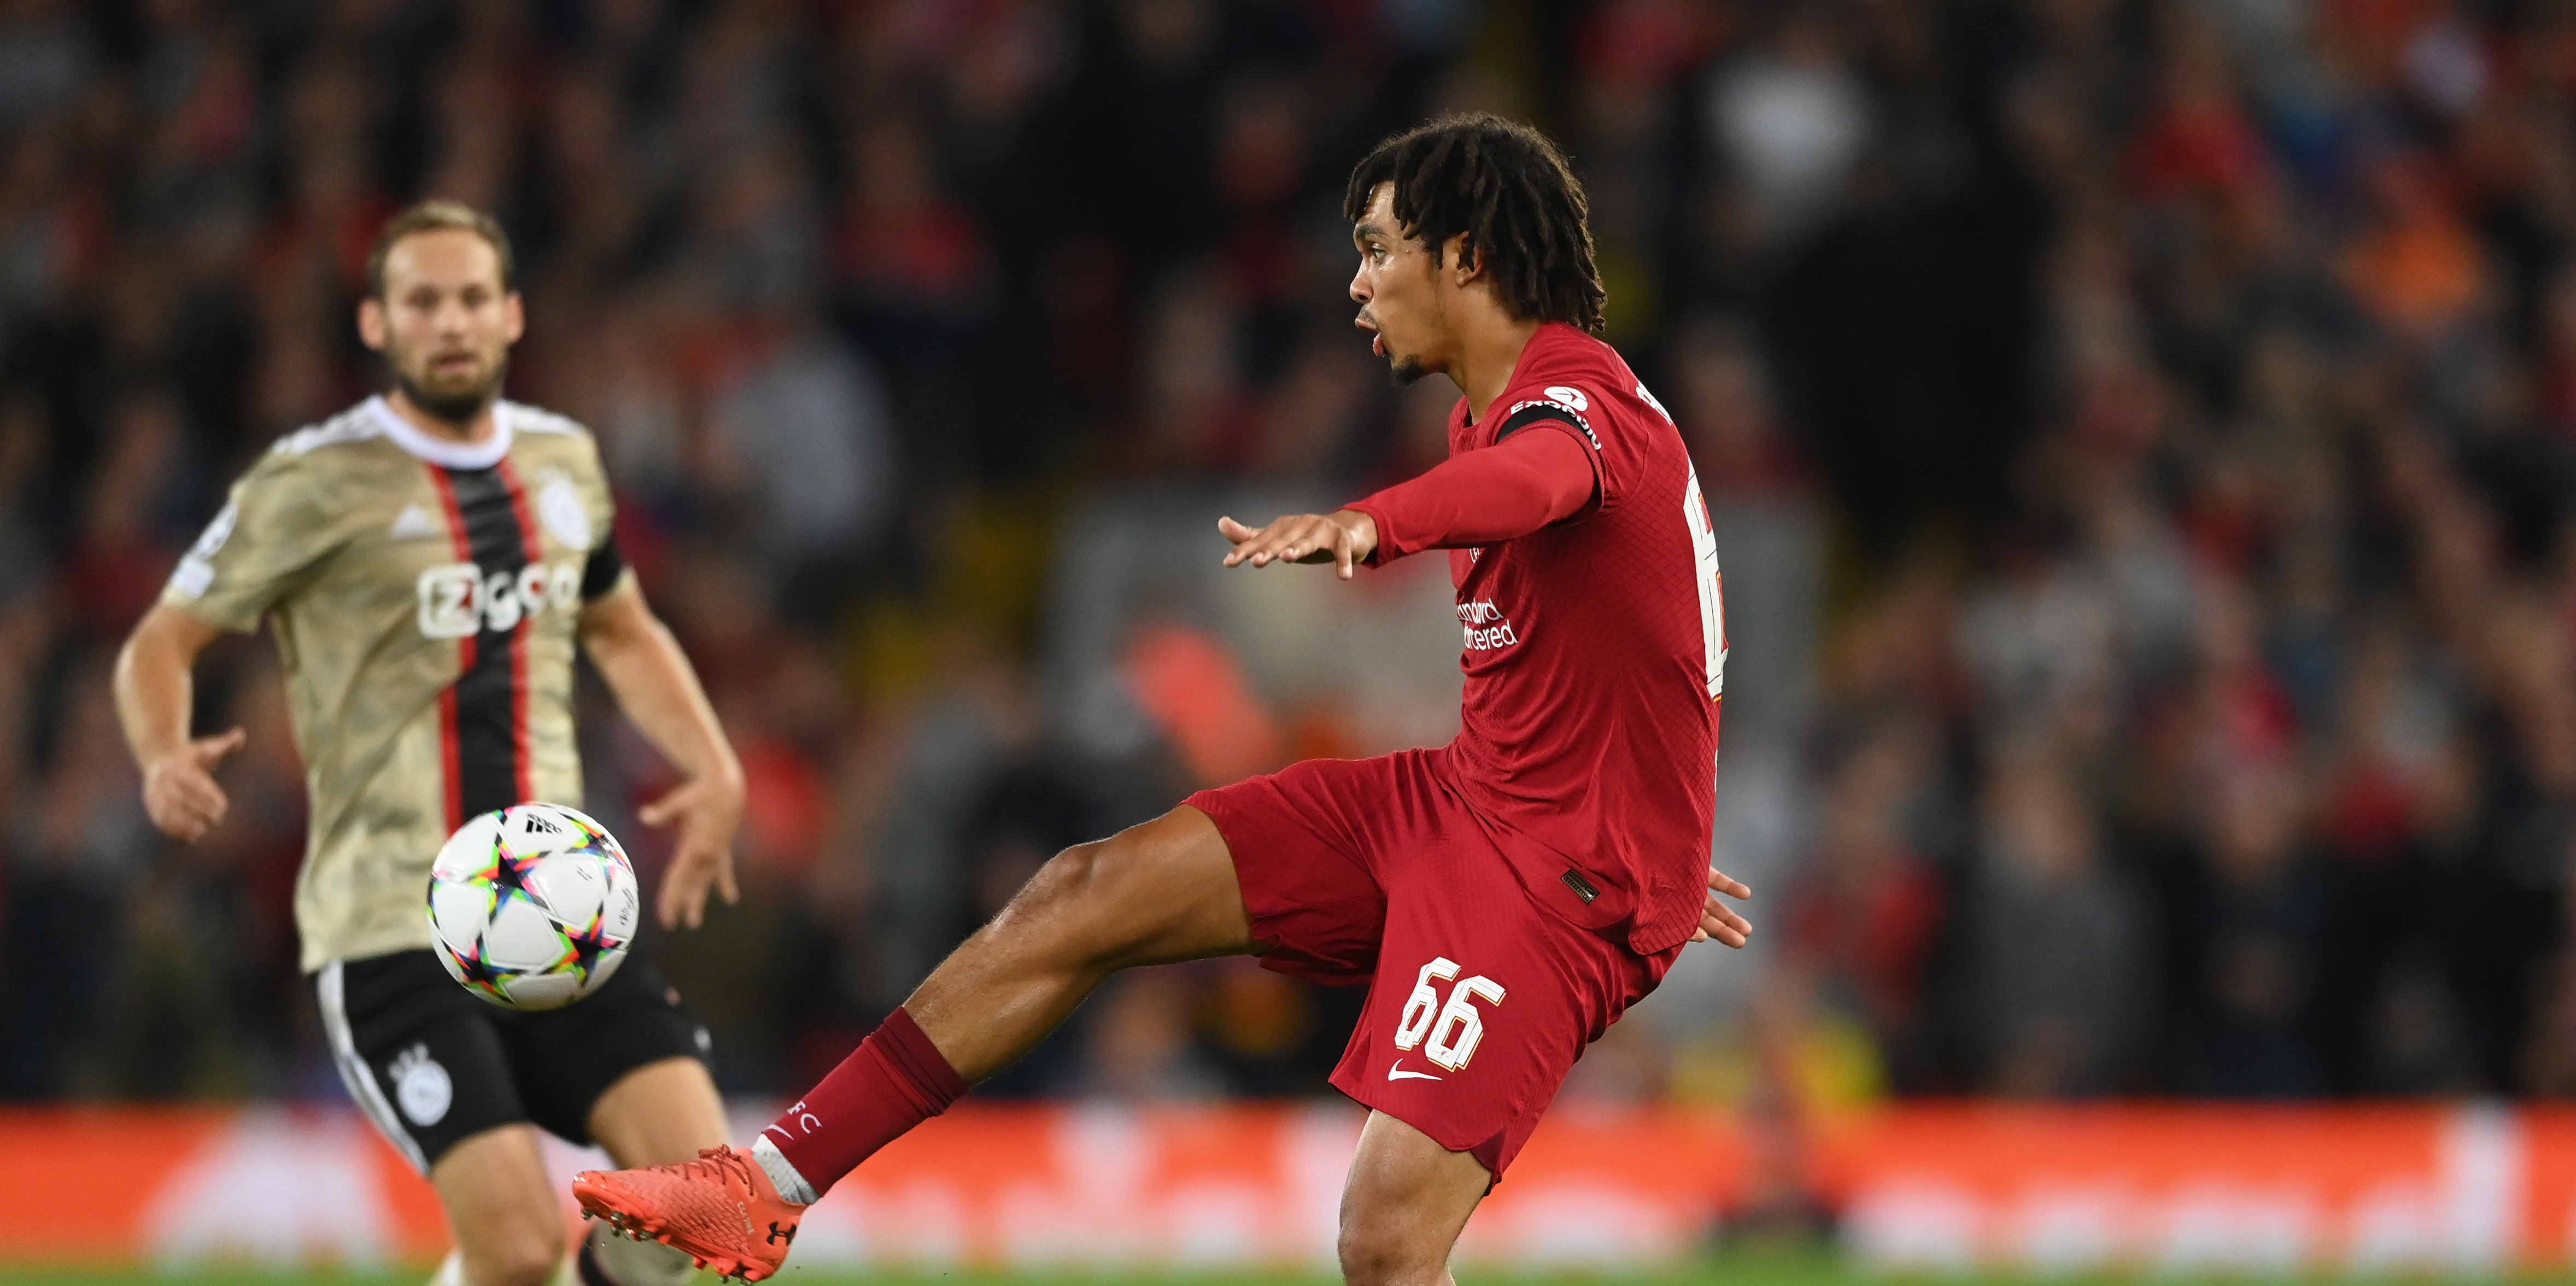 ‘Defensively, he’s Championship level’ – French football legend blasts Liverpool defender